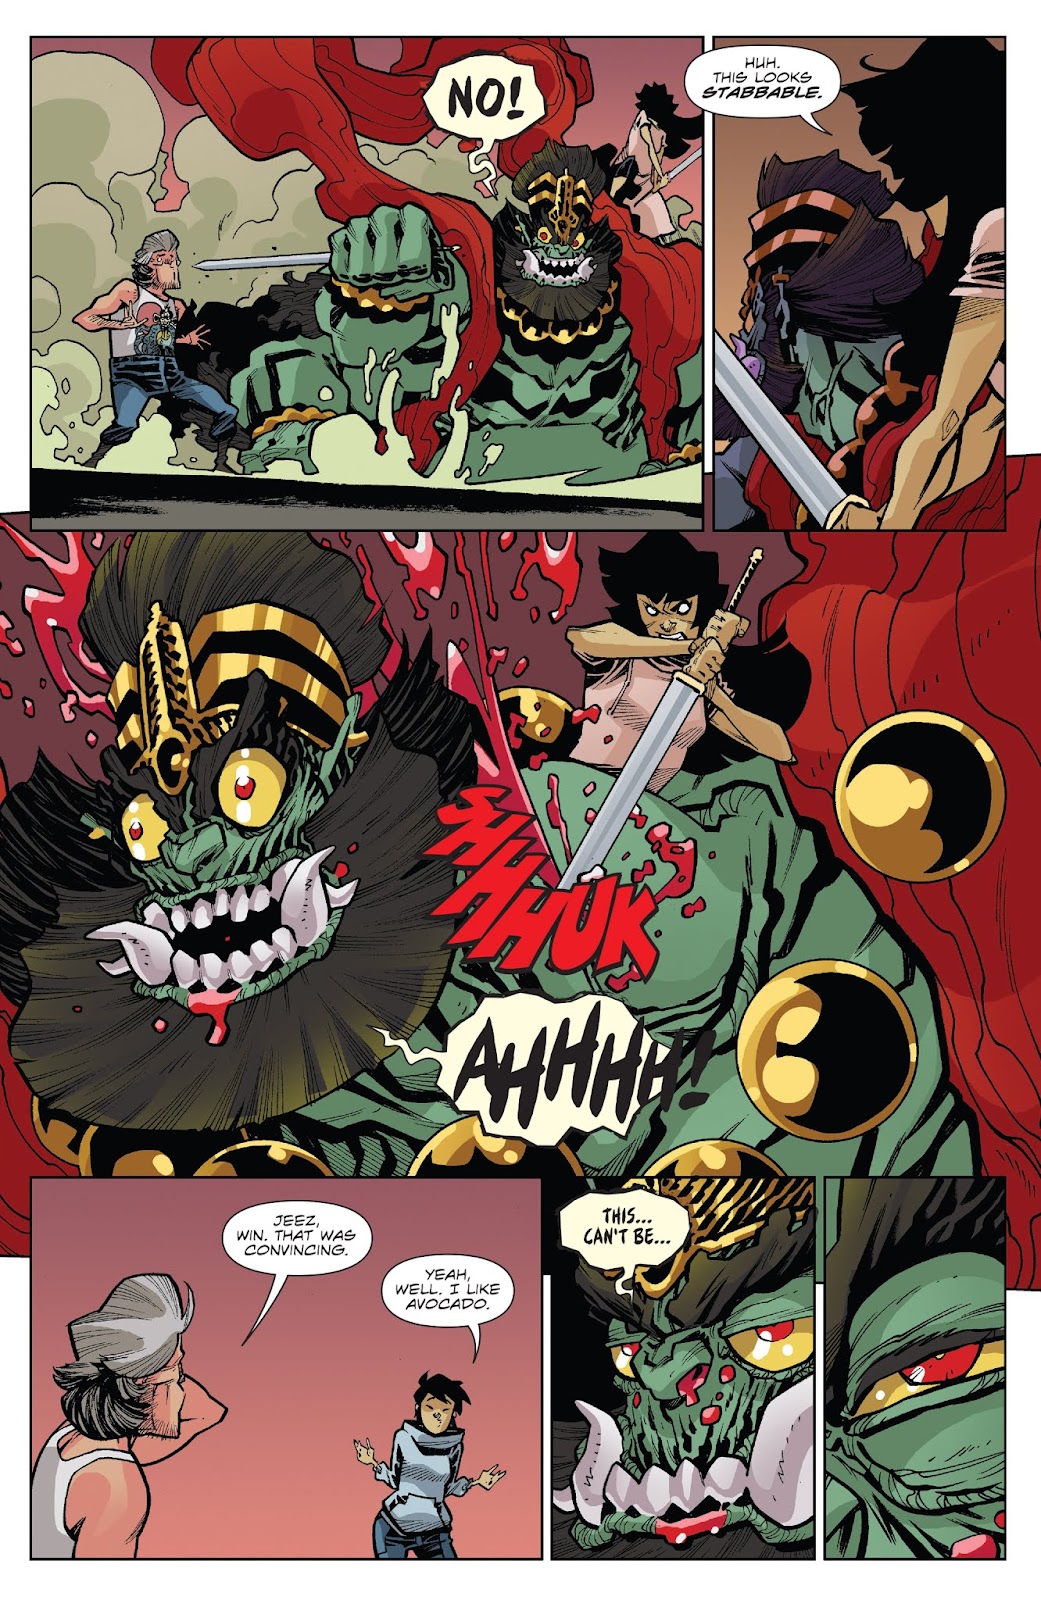 Big Trouble in Little China: Old Man Jack issue 9 - Page 22